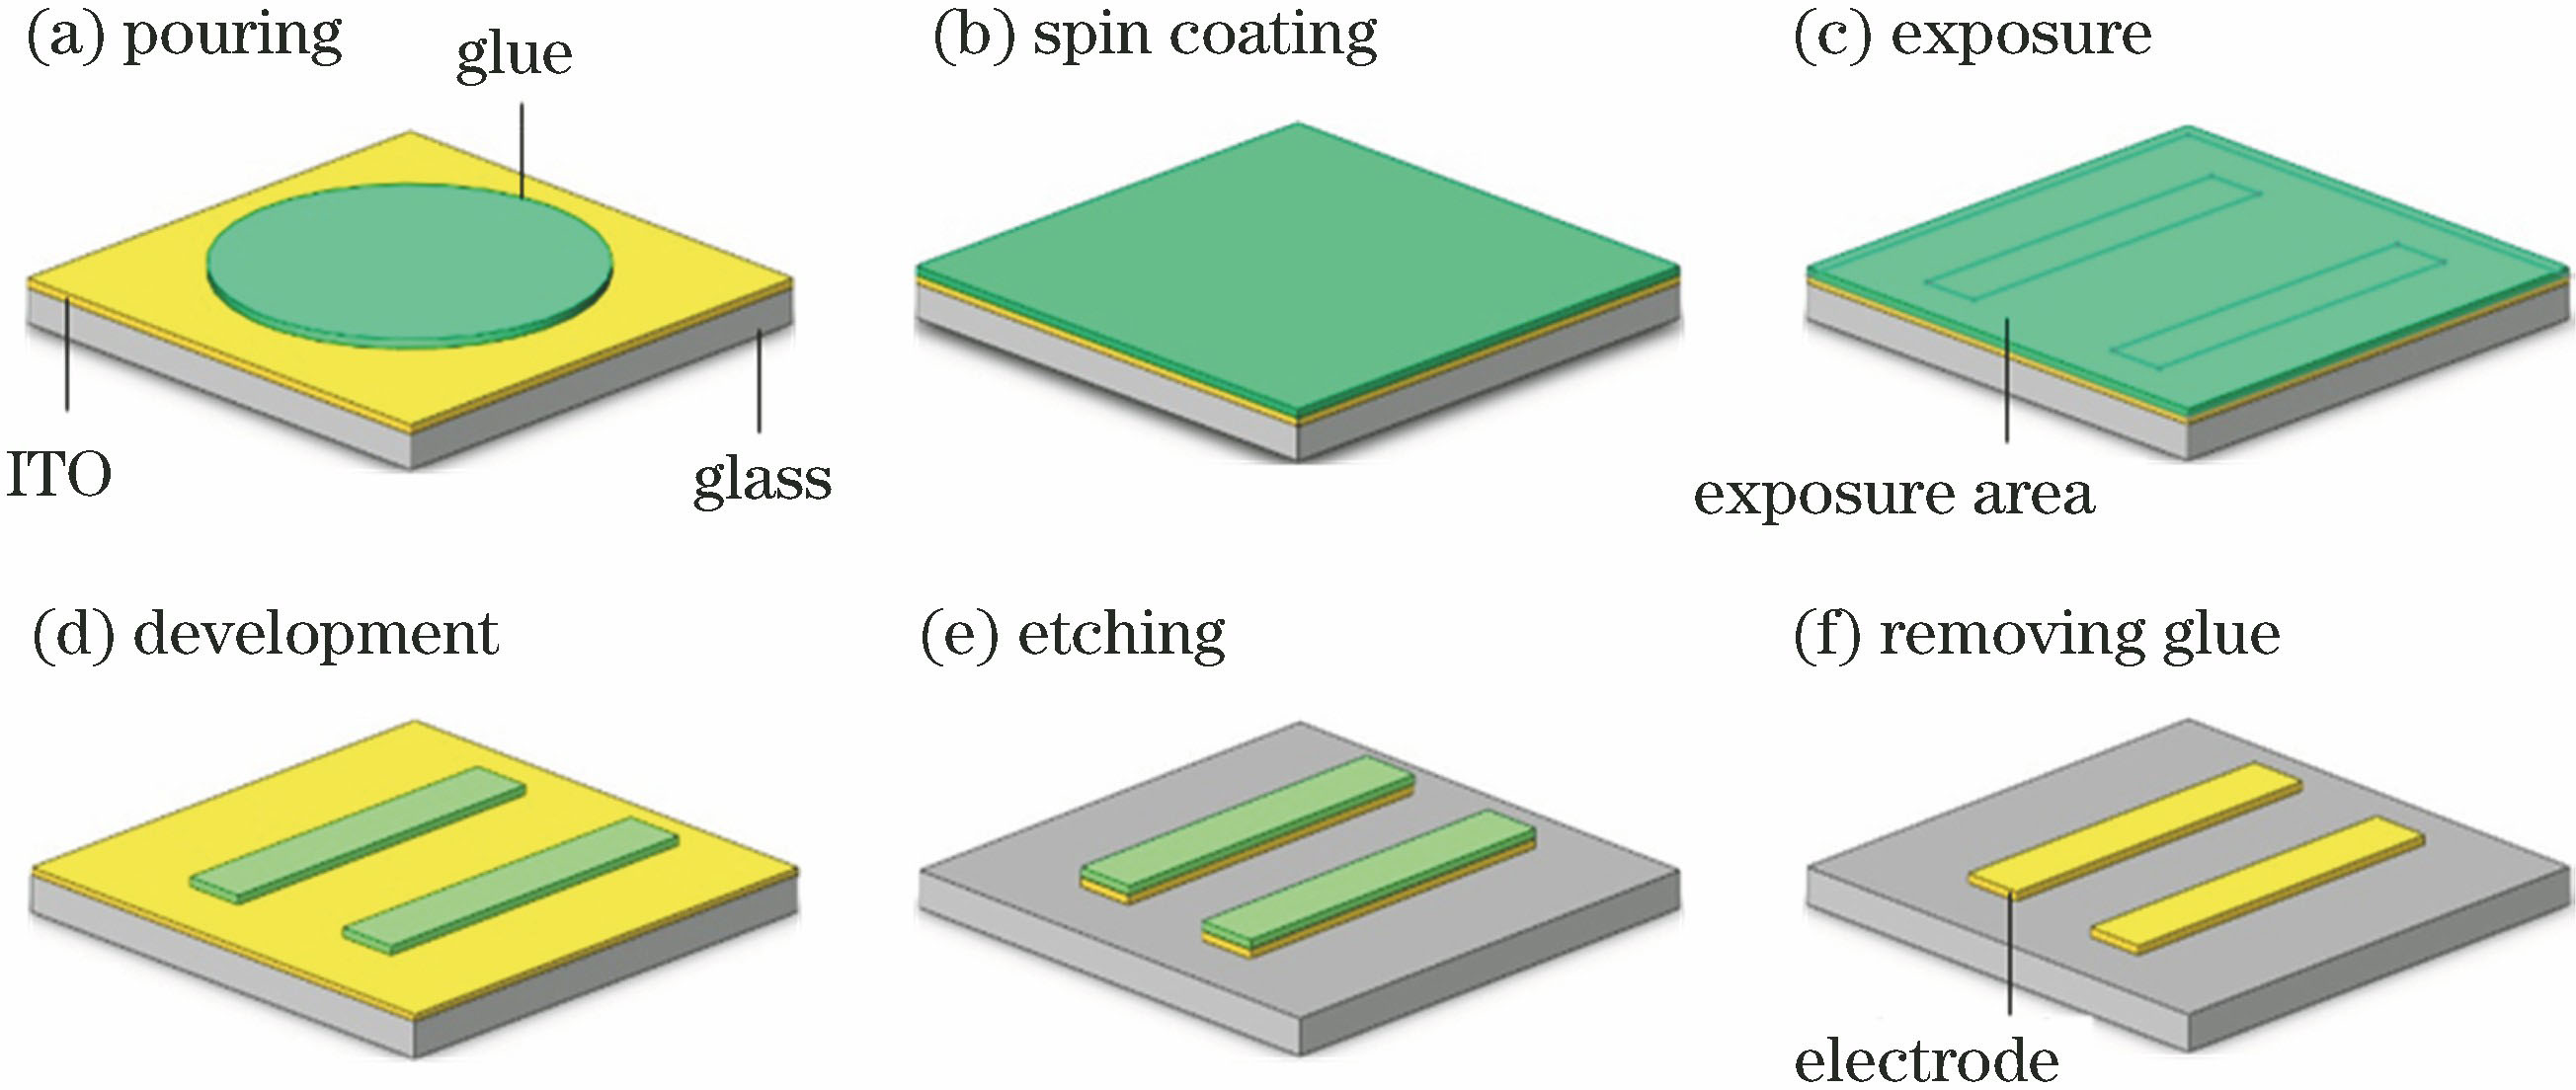 Diagram of production process. (a) Pouring; (b) spin coating; (c) exposure; (d) development; (e) etching; (f) removing glue